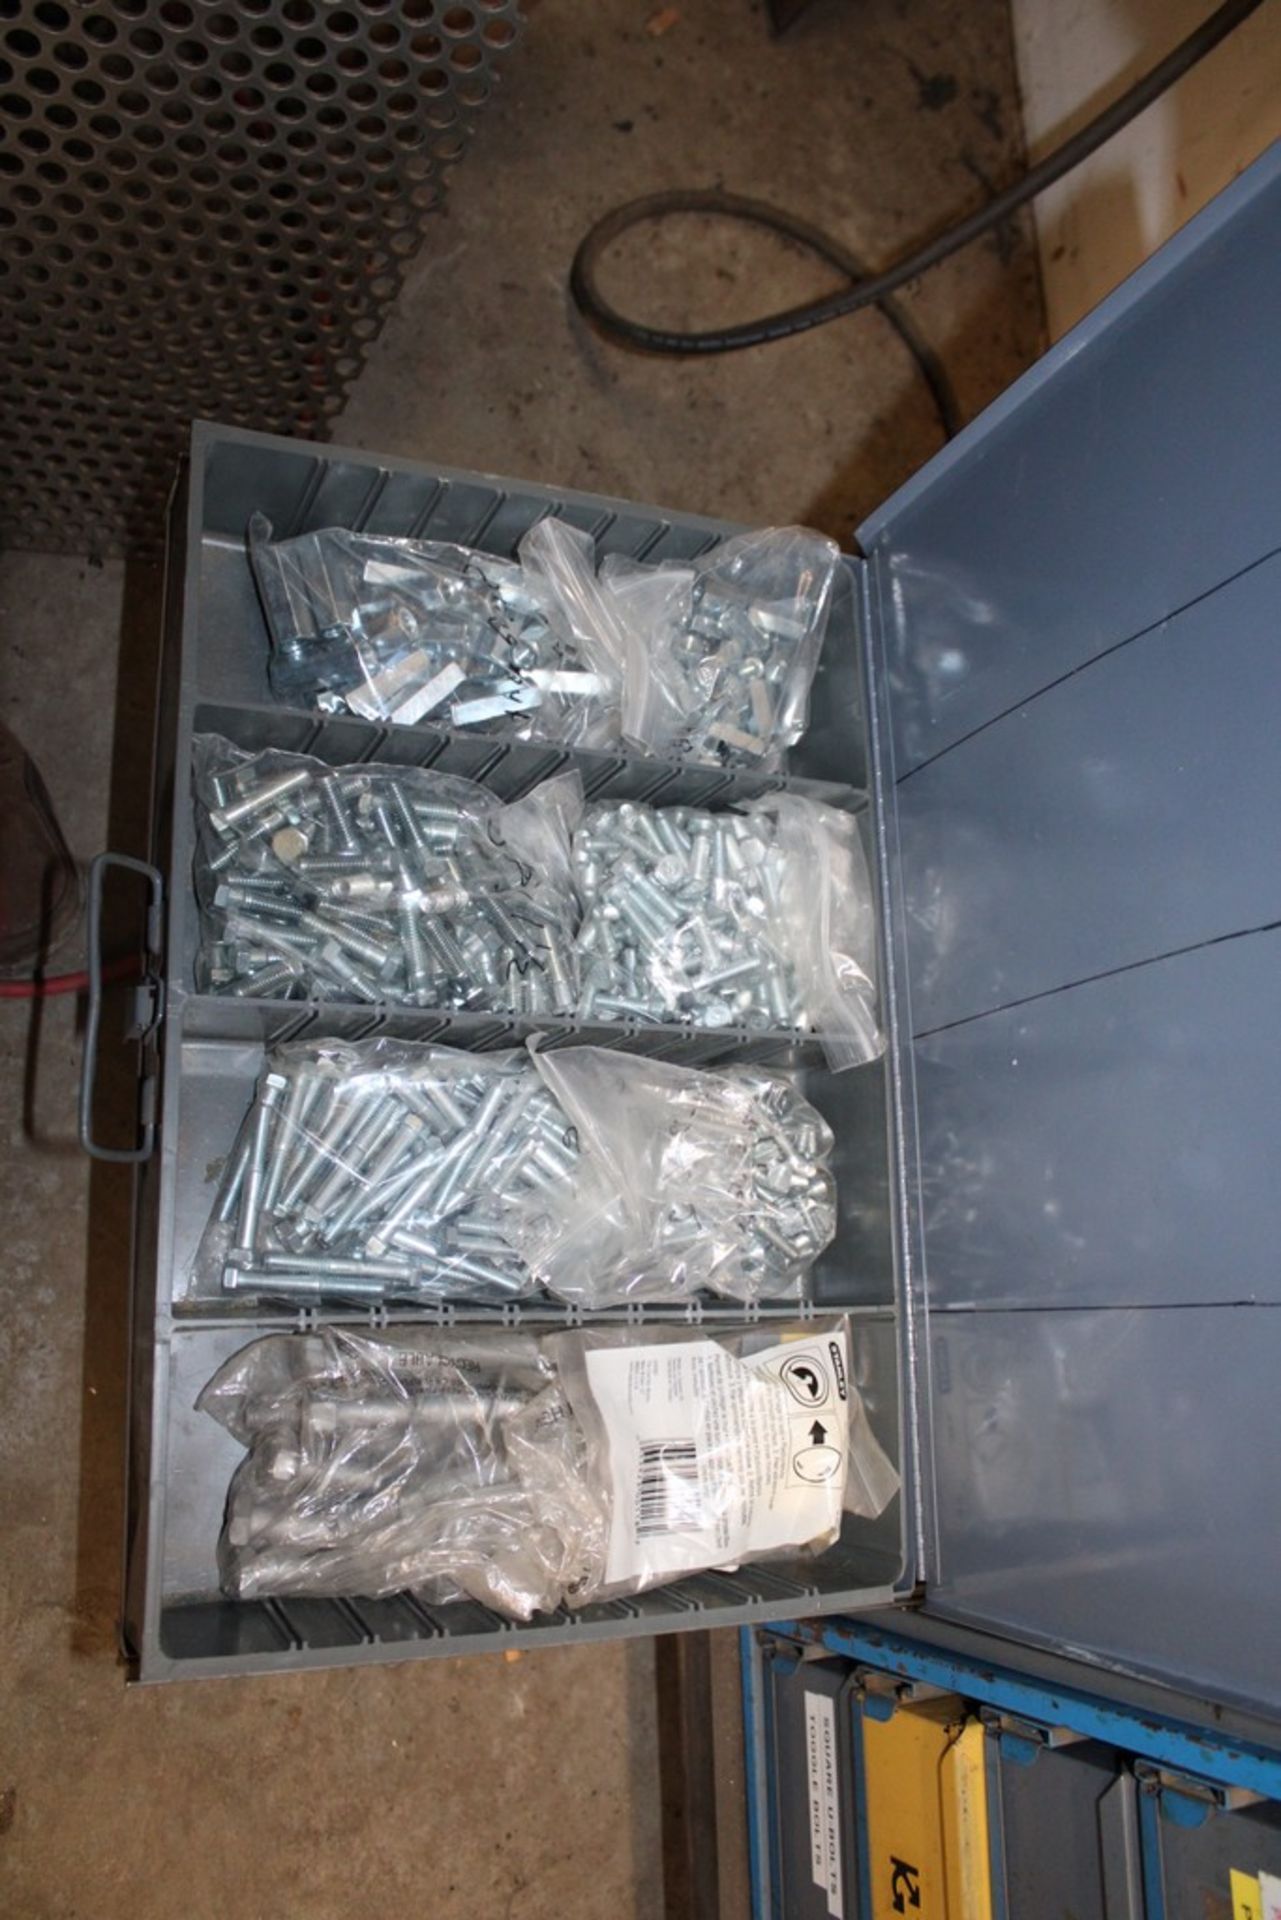 FOUR DRAWER PARTS CABINET WITH NAILS, ANCHORS, BOLTS, ETC. - Image 4 of 4